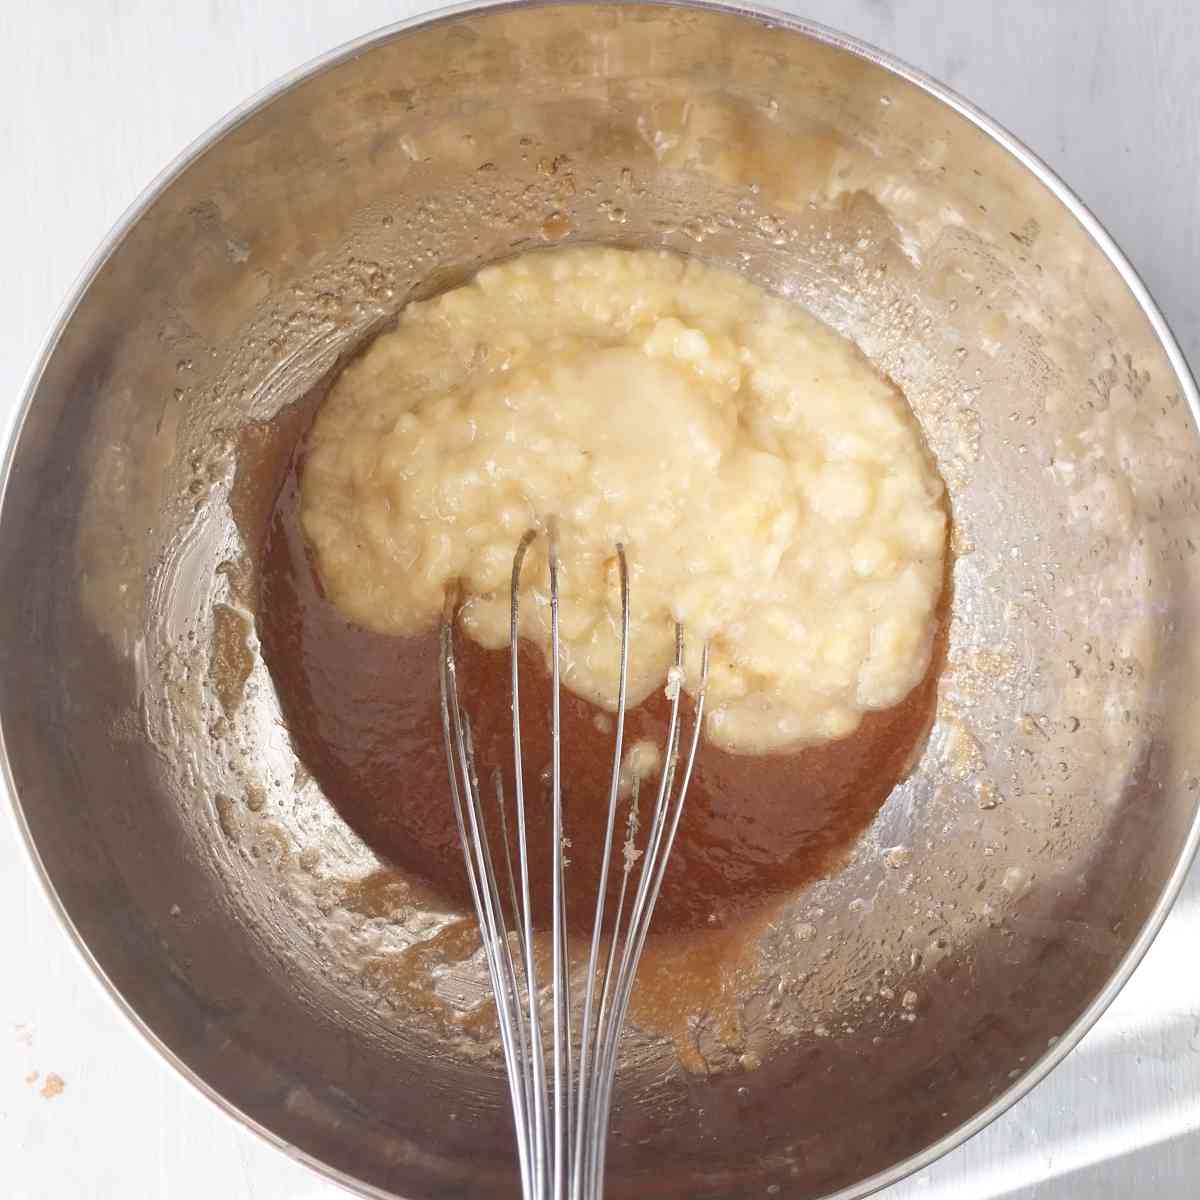 Mashed bananas with the sugar mix in a large metal bowl with a whisk.